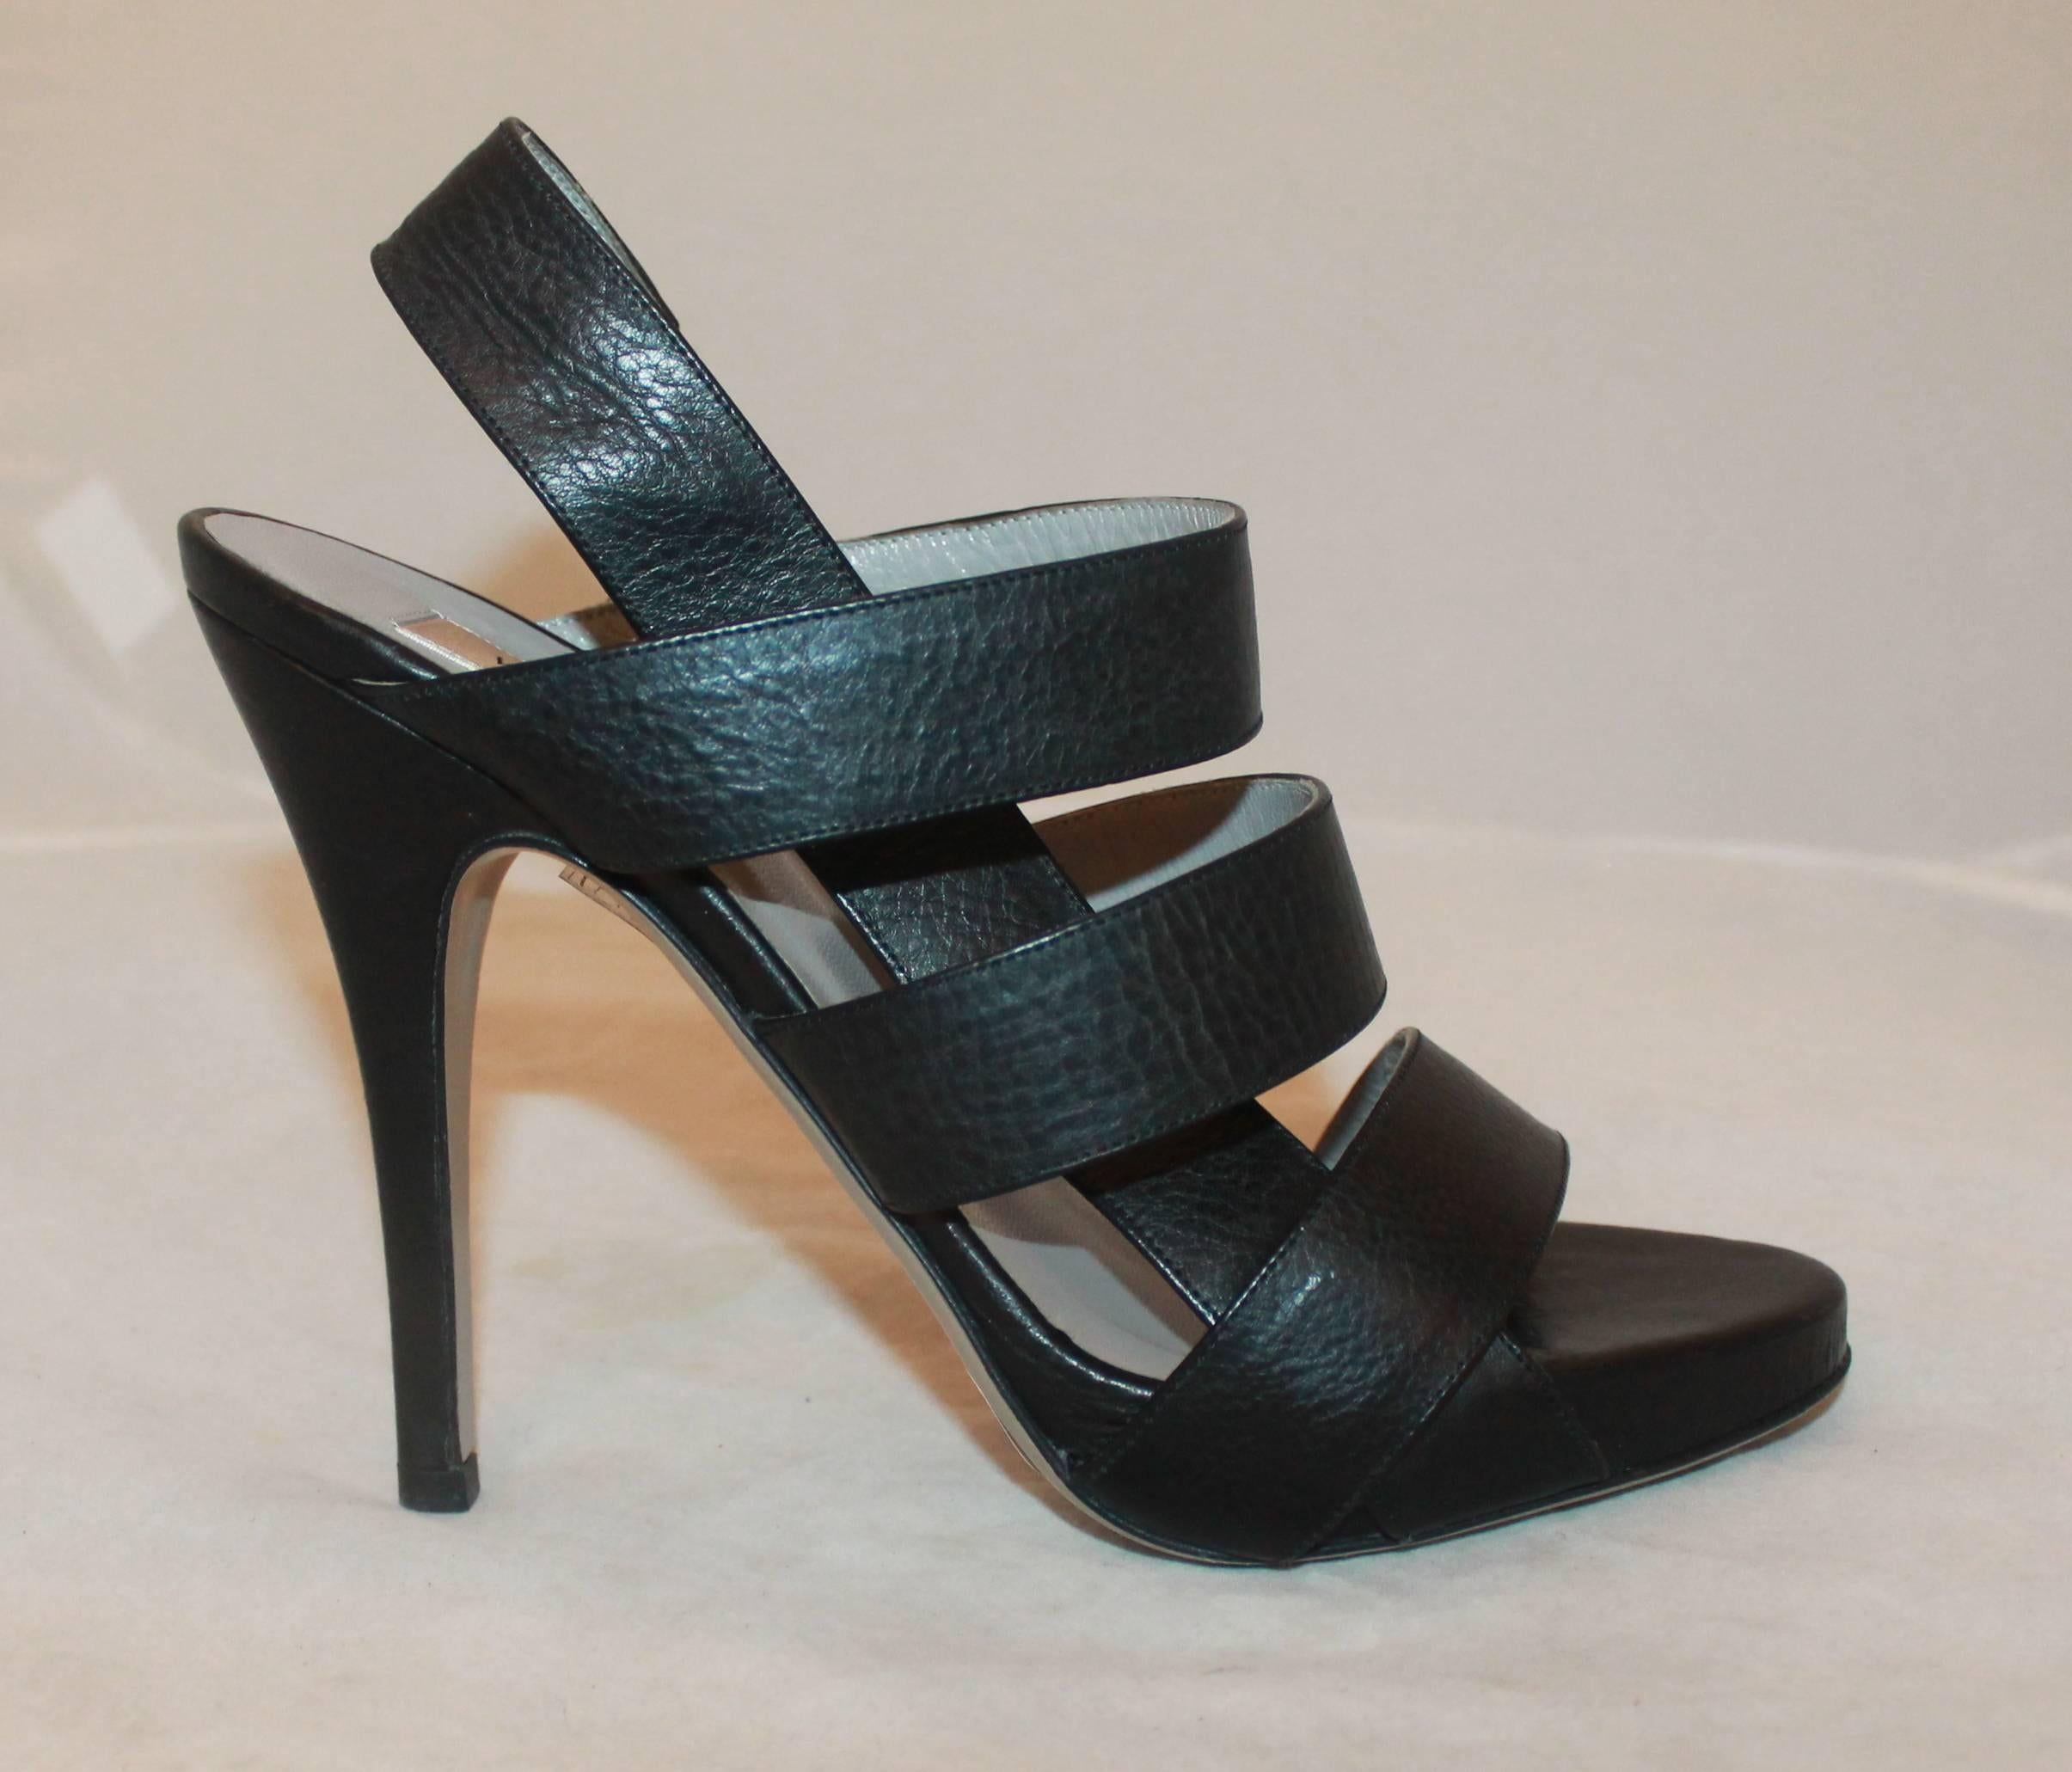 Valentino Black Leather Strappy Platform Heels - 37. These heels are in excellent condition with very minor wear on the bottom. 

Measurements:
Platform: 0.5